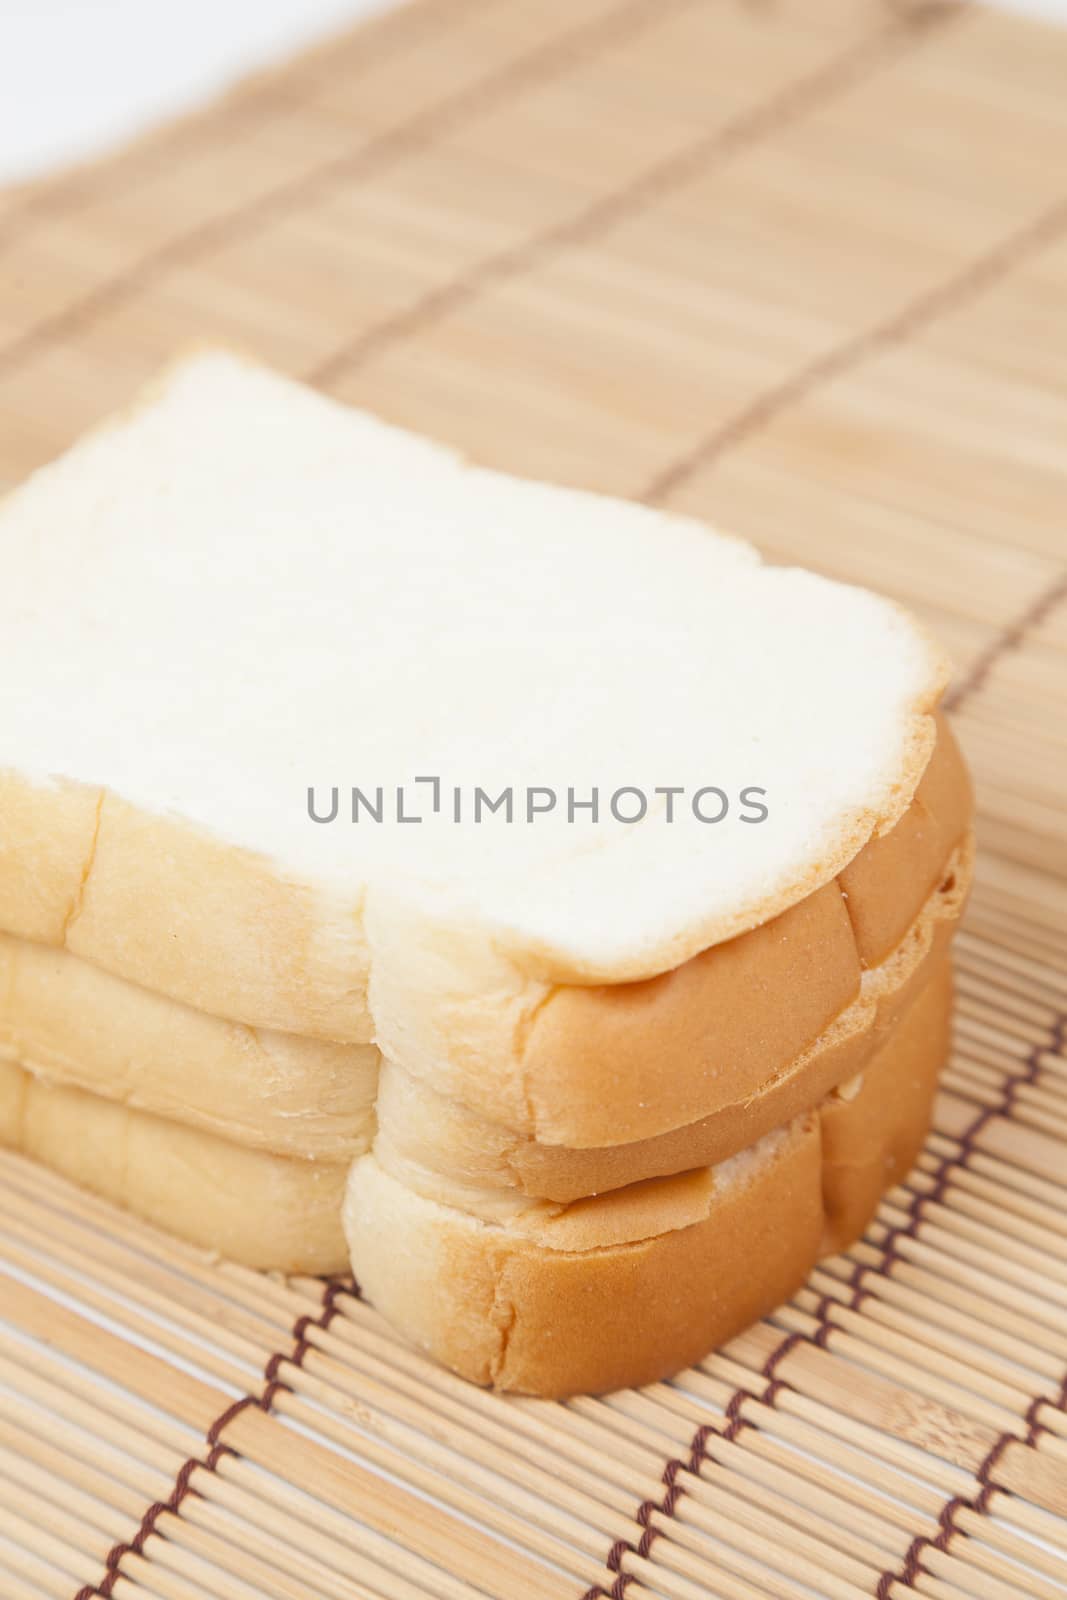 Sliced ������bread on the wooden plate.pack-shot bread in studio.